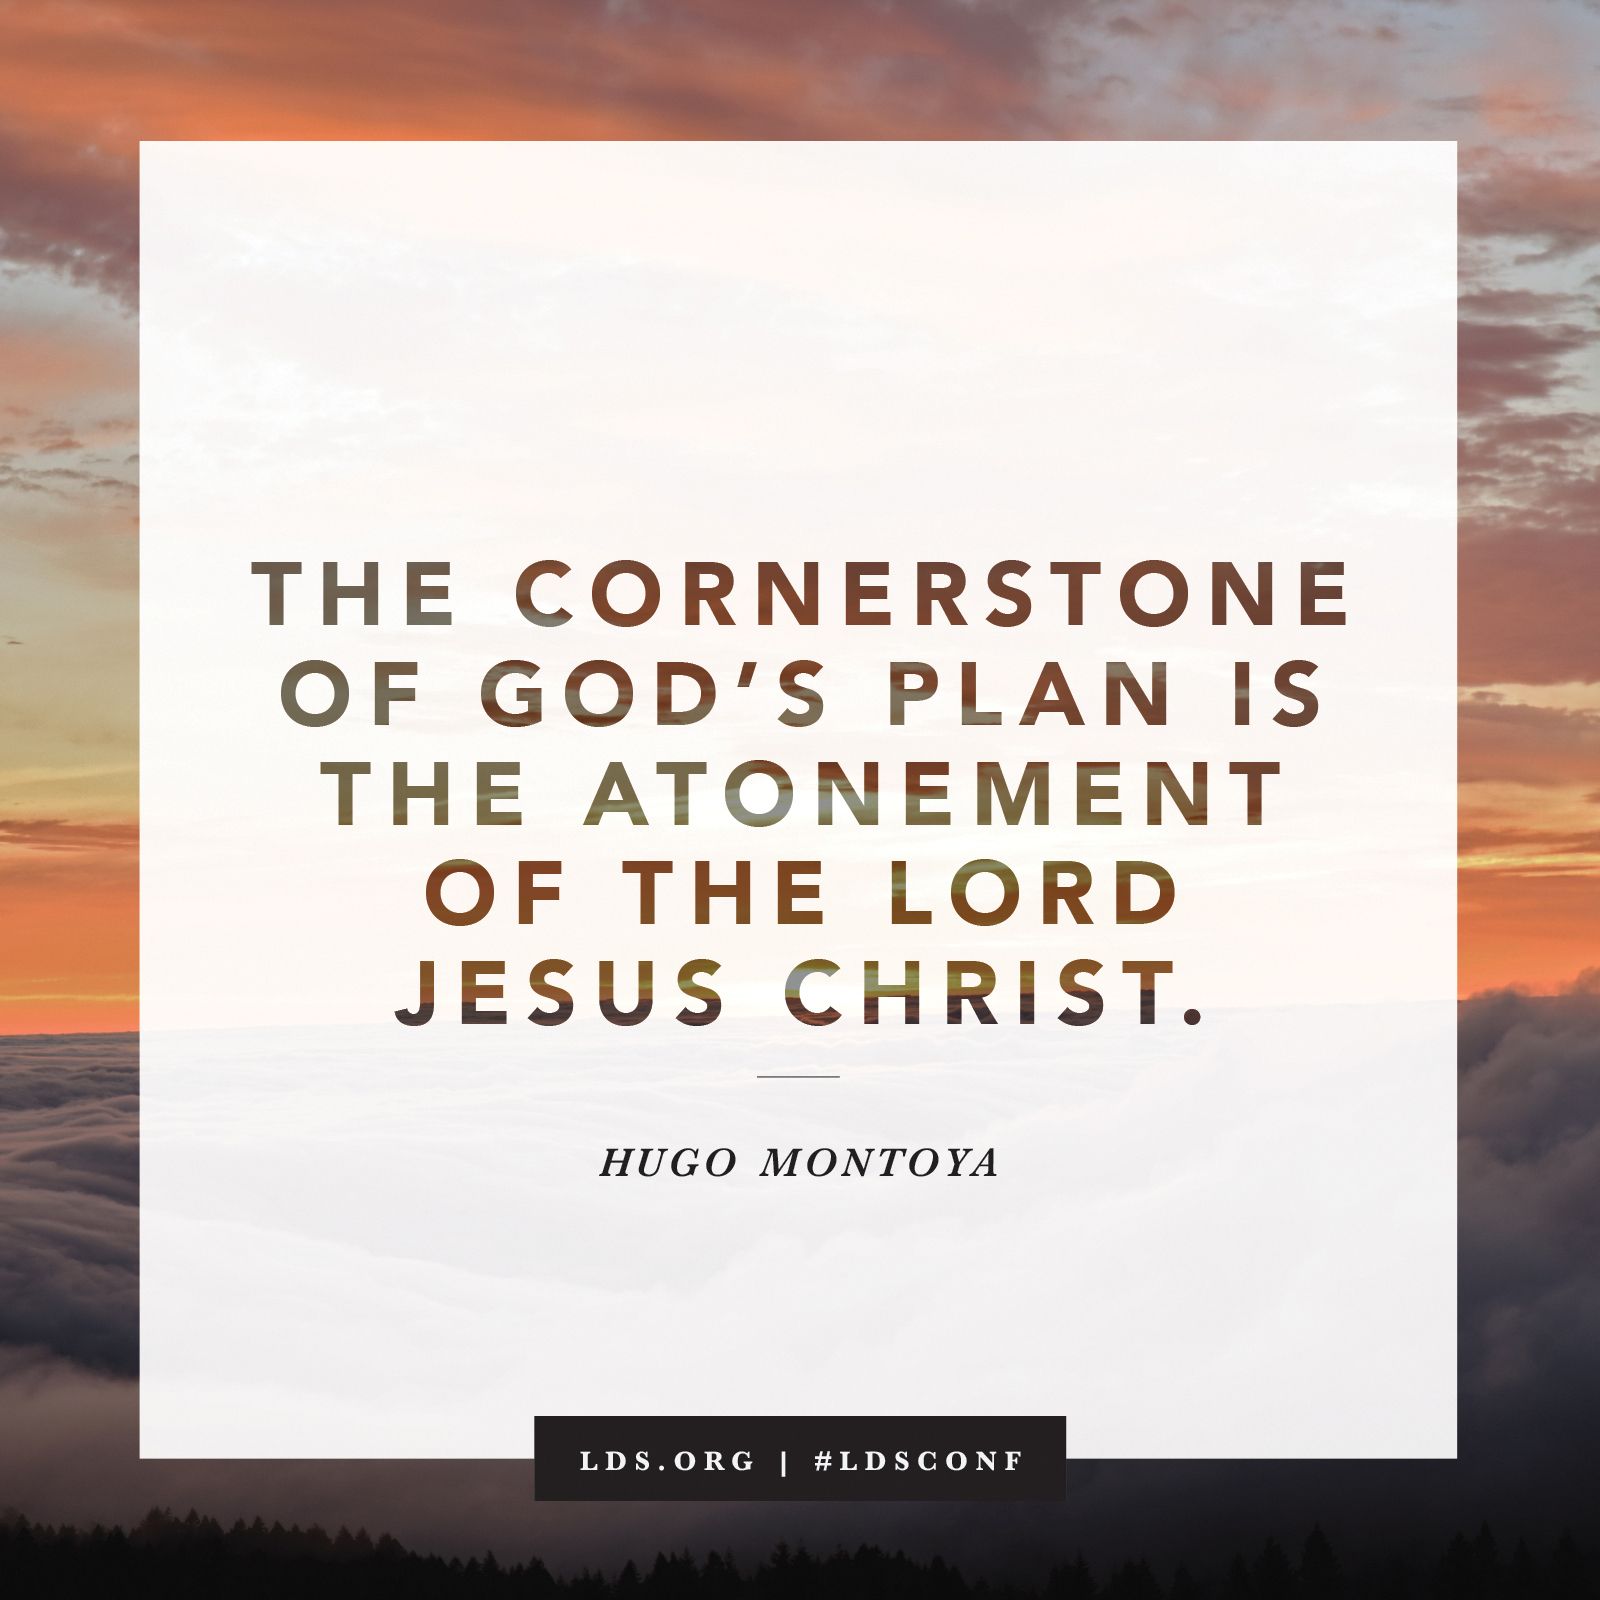 “The cornerstone of God’s plan is the Atonement of the Lord Jesus Christ.” —Elder Hugo Montoya, “Tested and Tempted—but Helped”